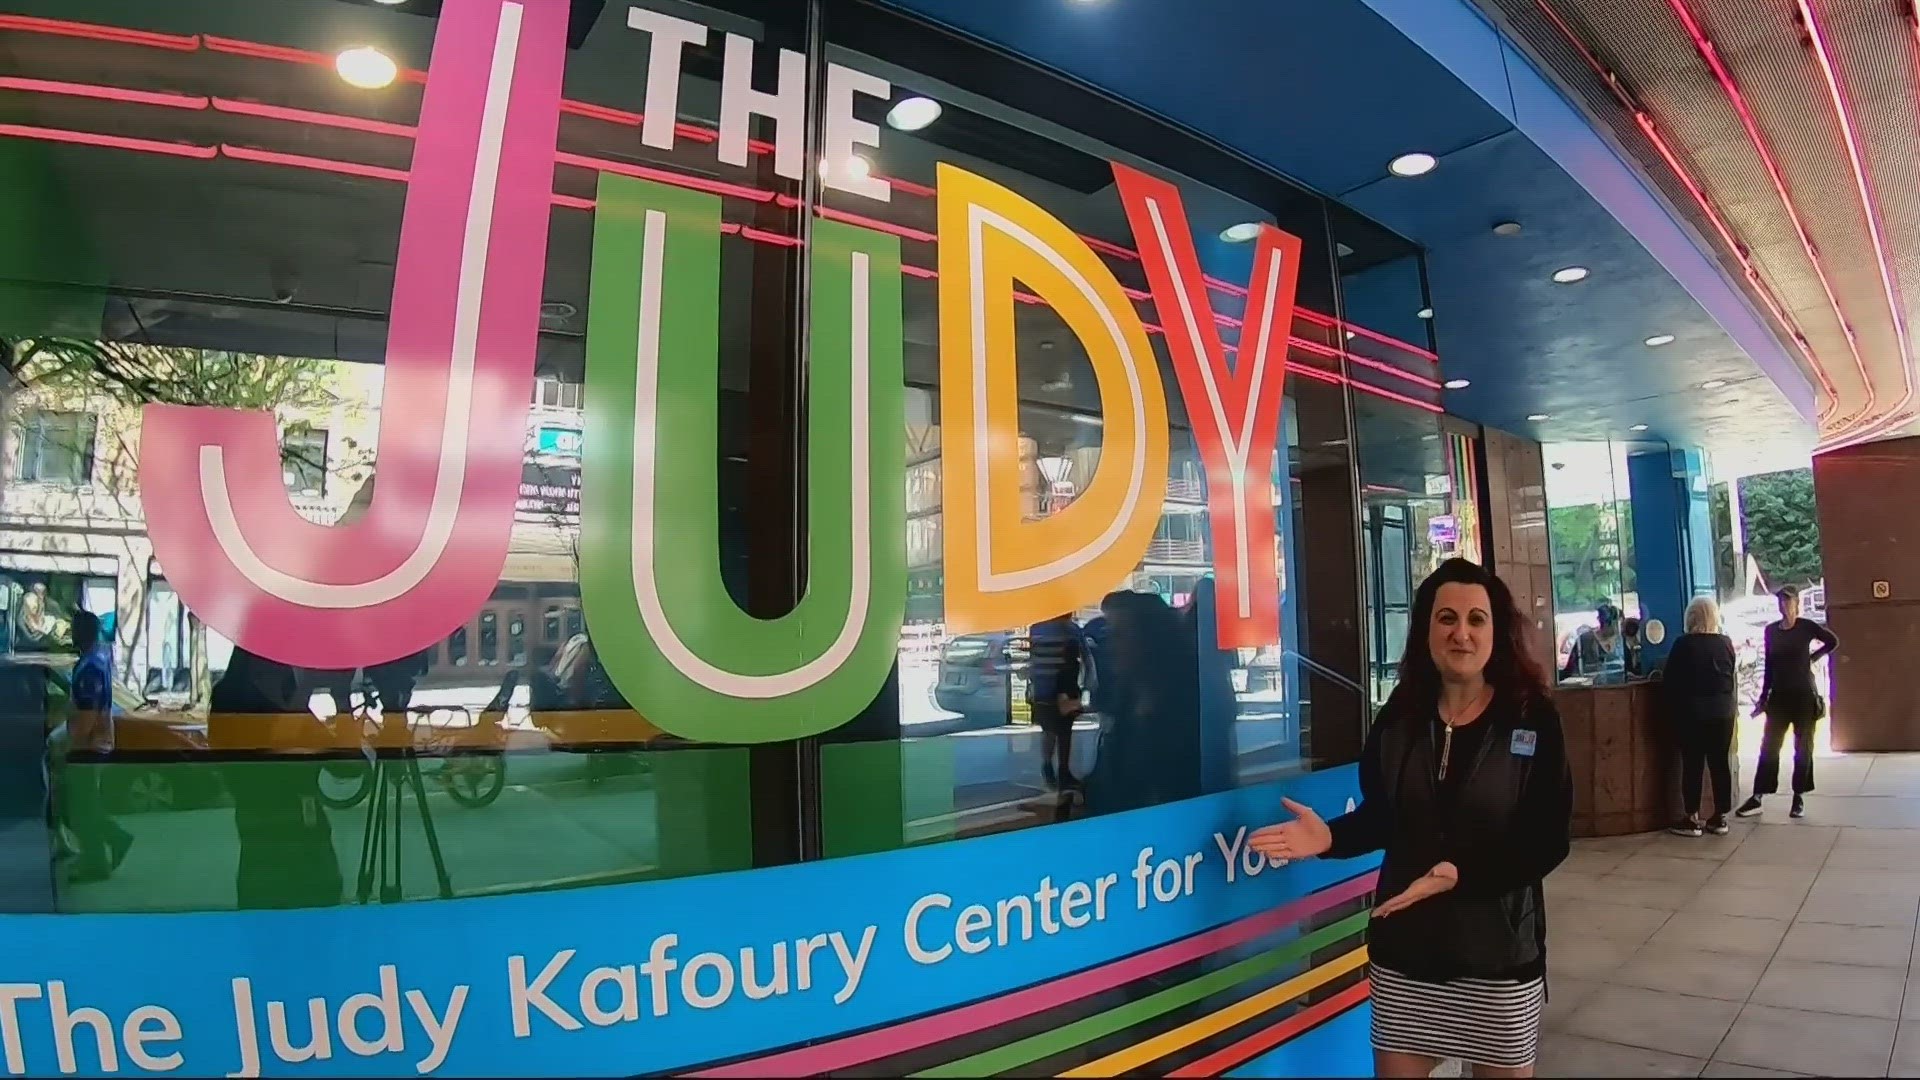 The Judy has been a pillar of the community for 30 years in Northwest Portland. Now in a new location downtown, it has a lot to offer to kids and families.